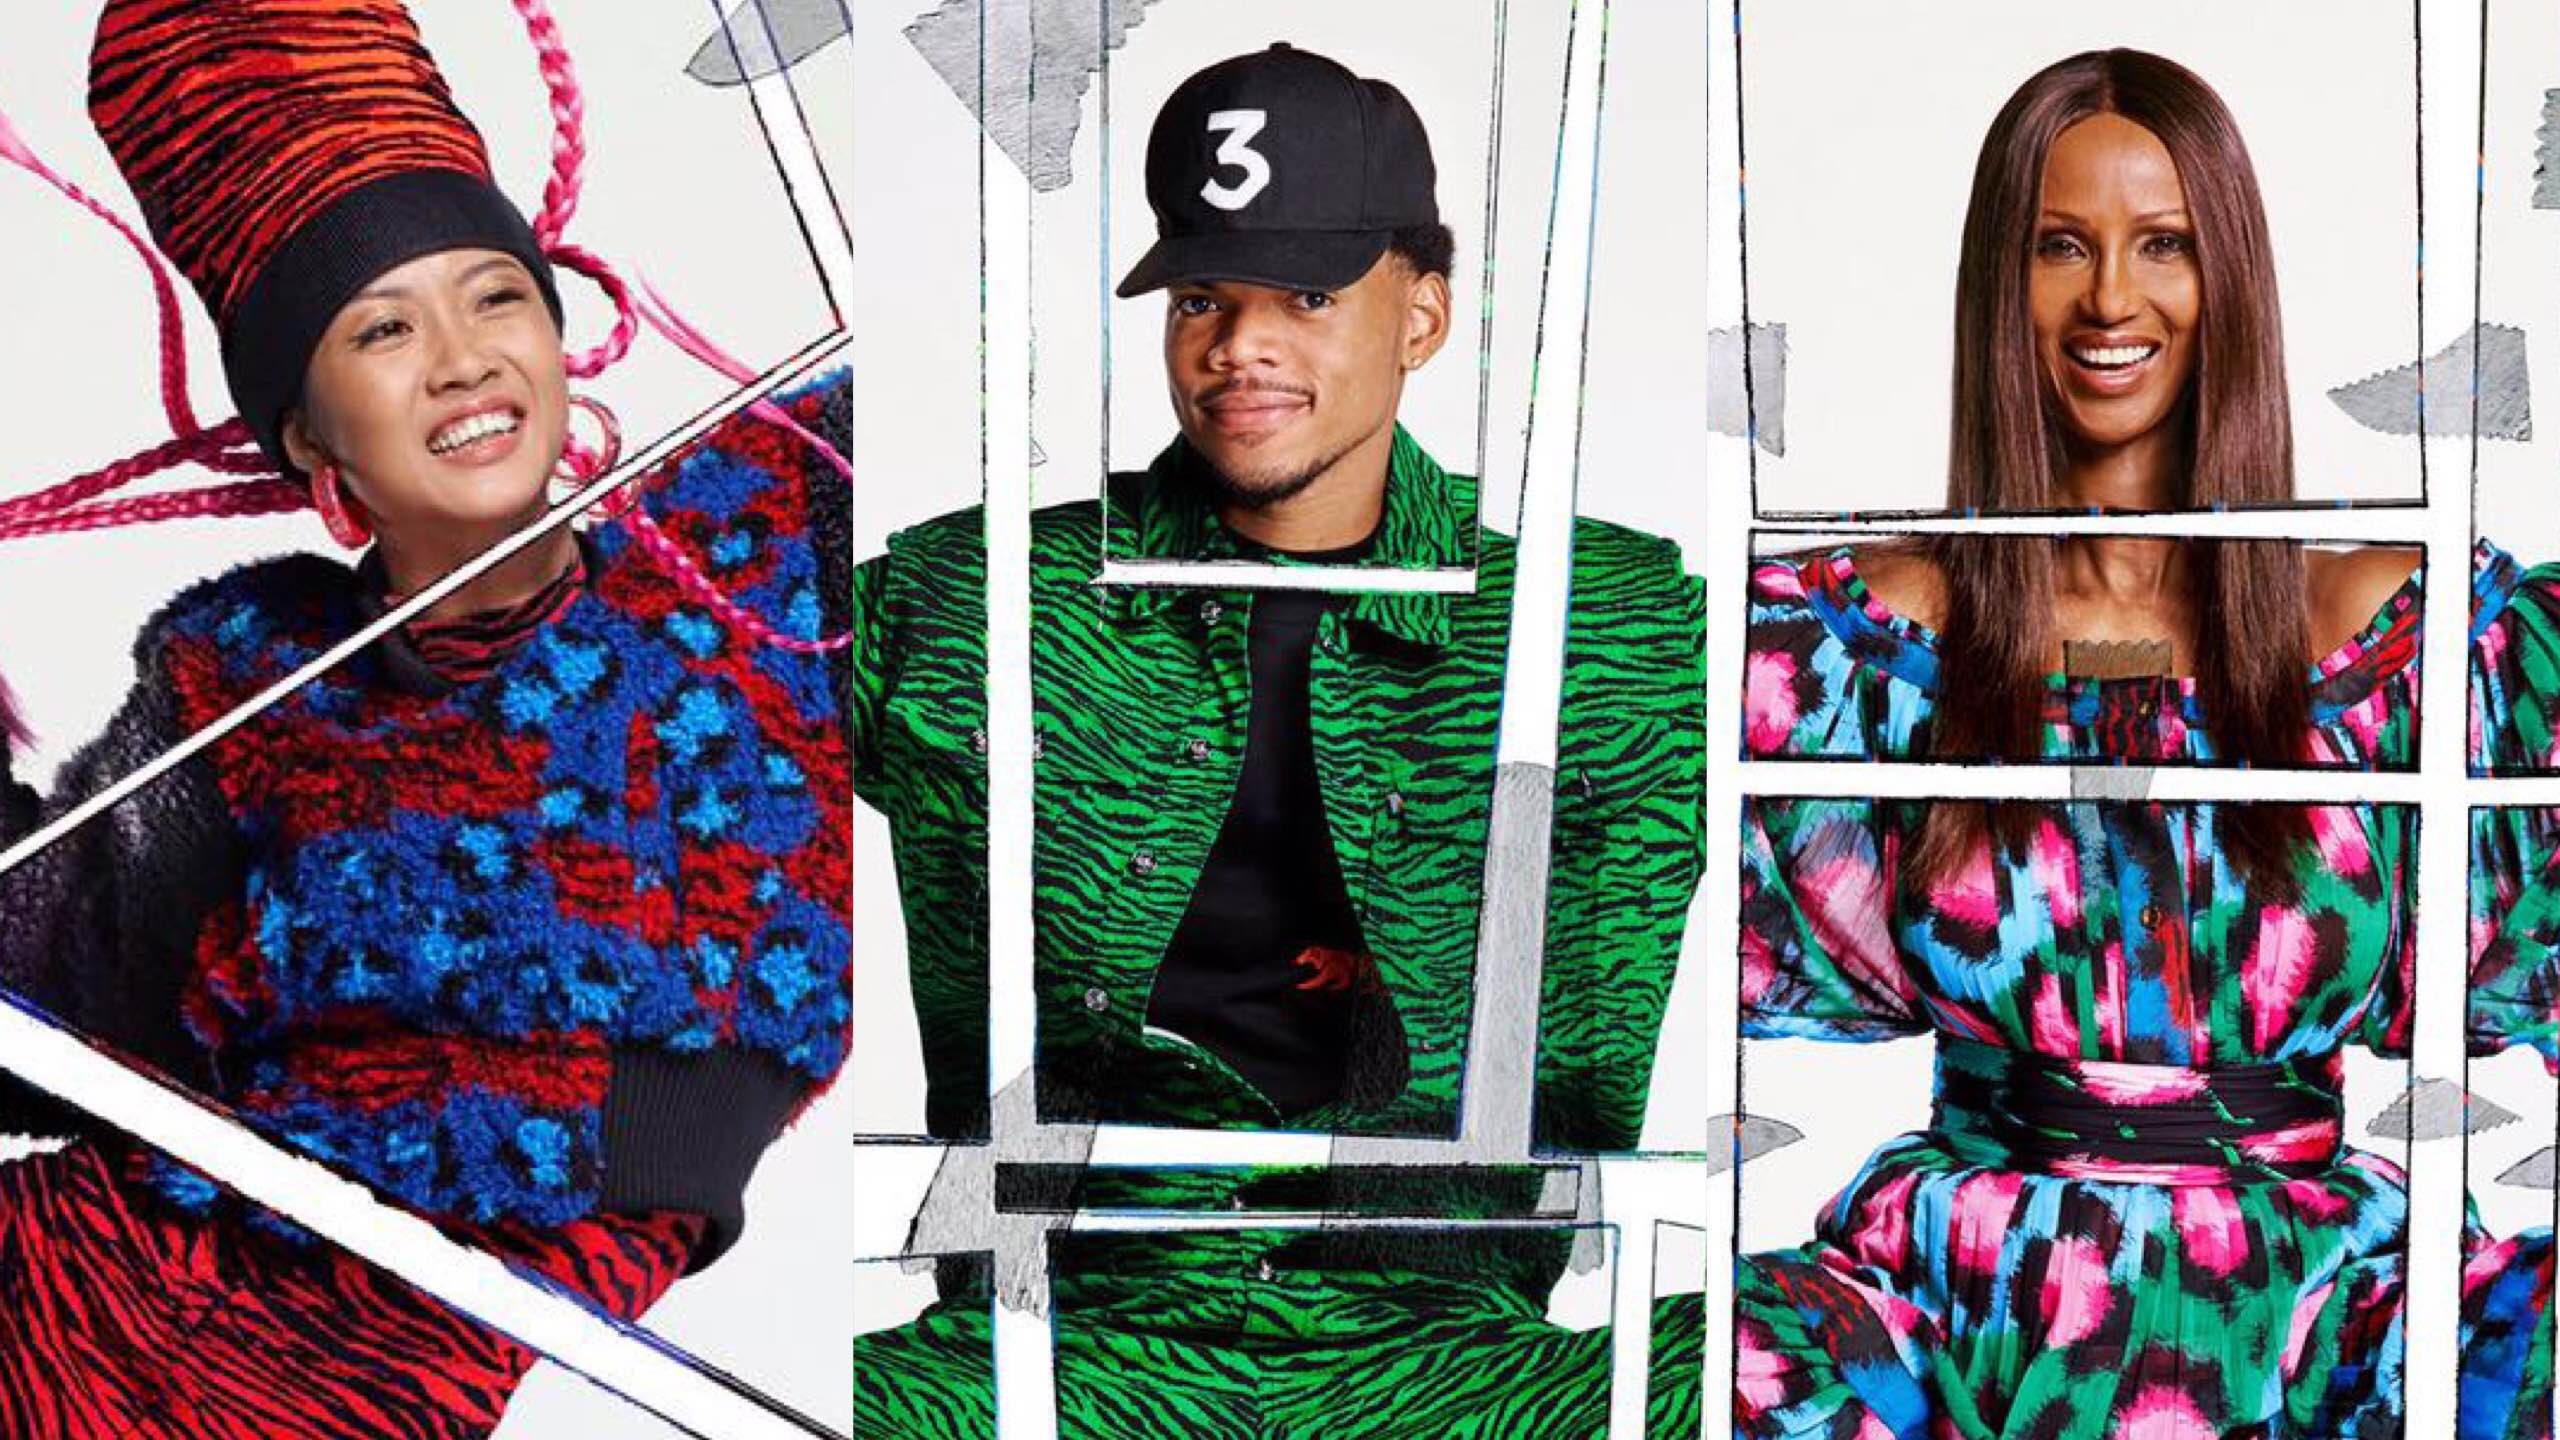 FIRST LOOK: Chance the Rapper, Iman, more in Kenzo x H&M campaign